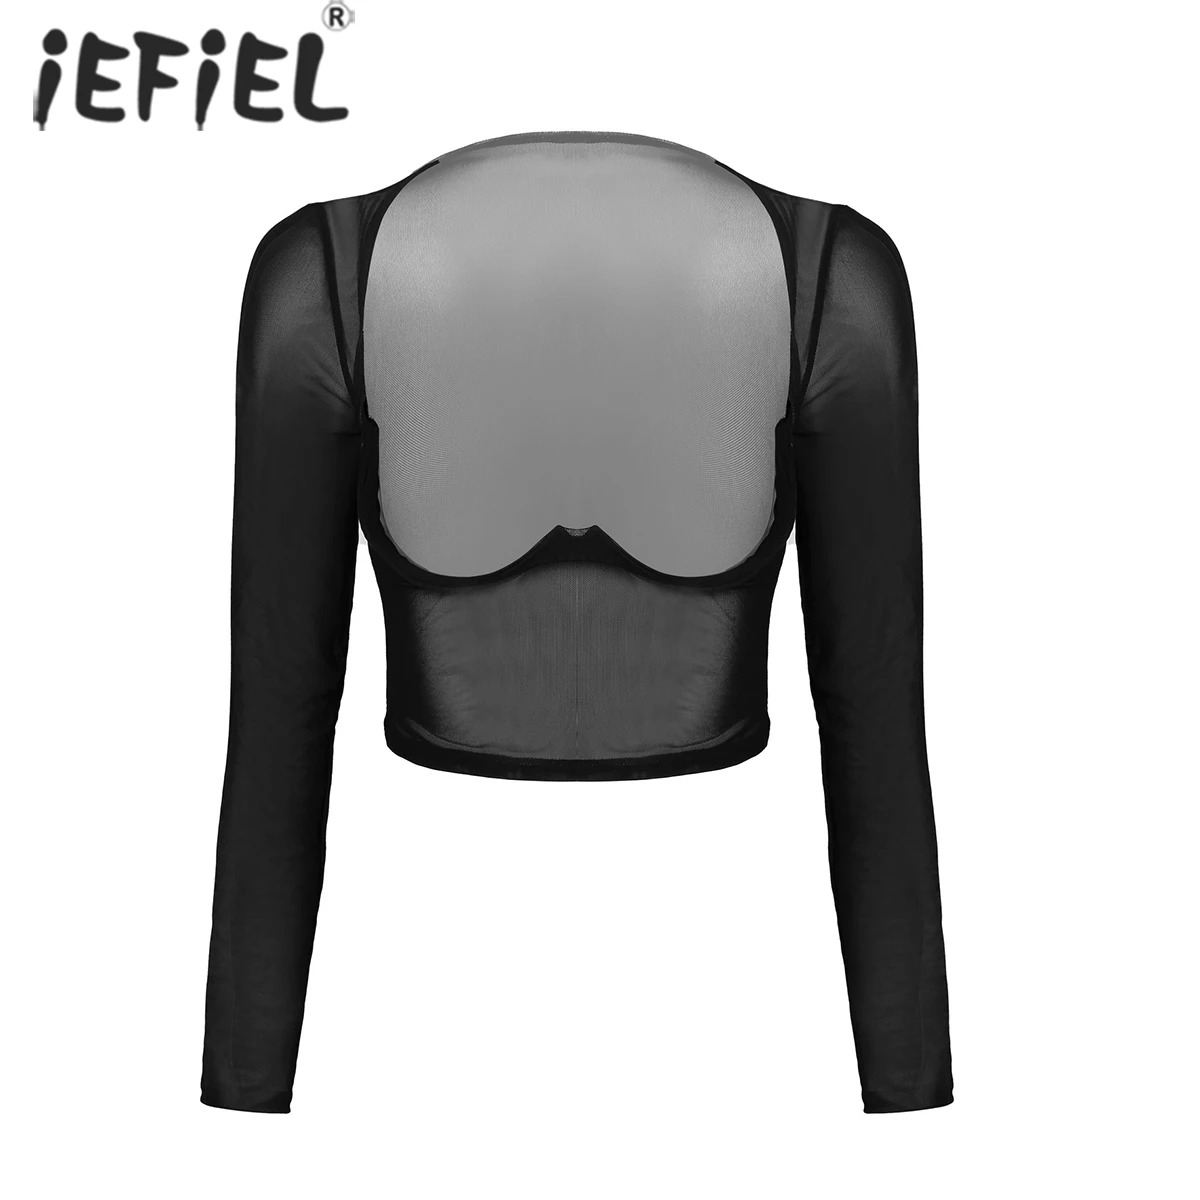 Women See-through Mesh Underwire Crop Top Long Sleeve Open Cup T-shirt Tops Sheer Leotard Tees Lingerie Costumes for Nightclub